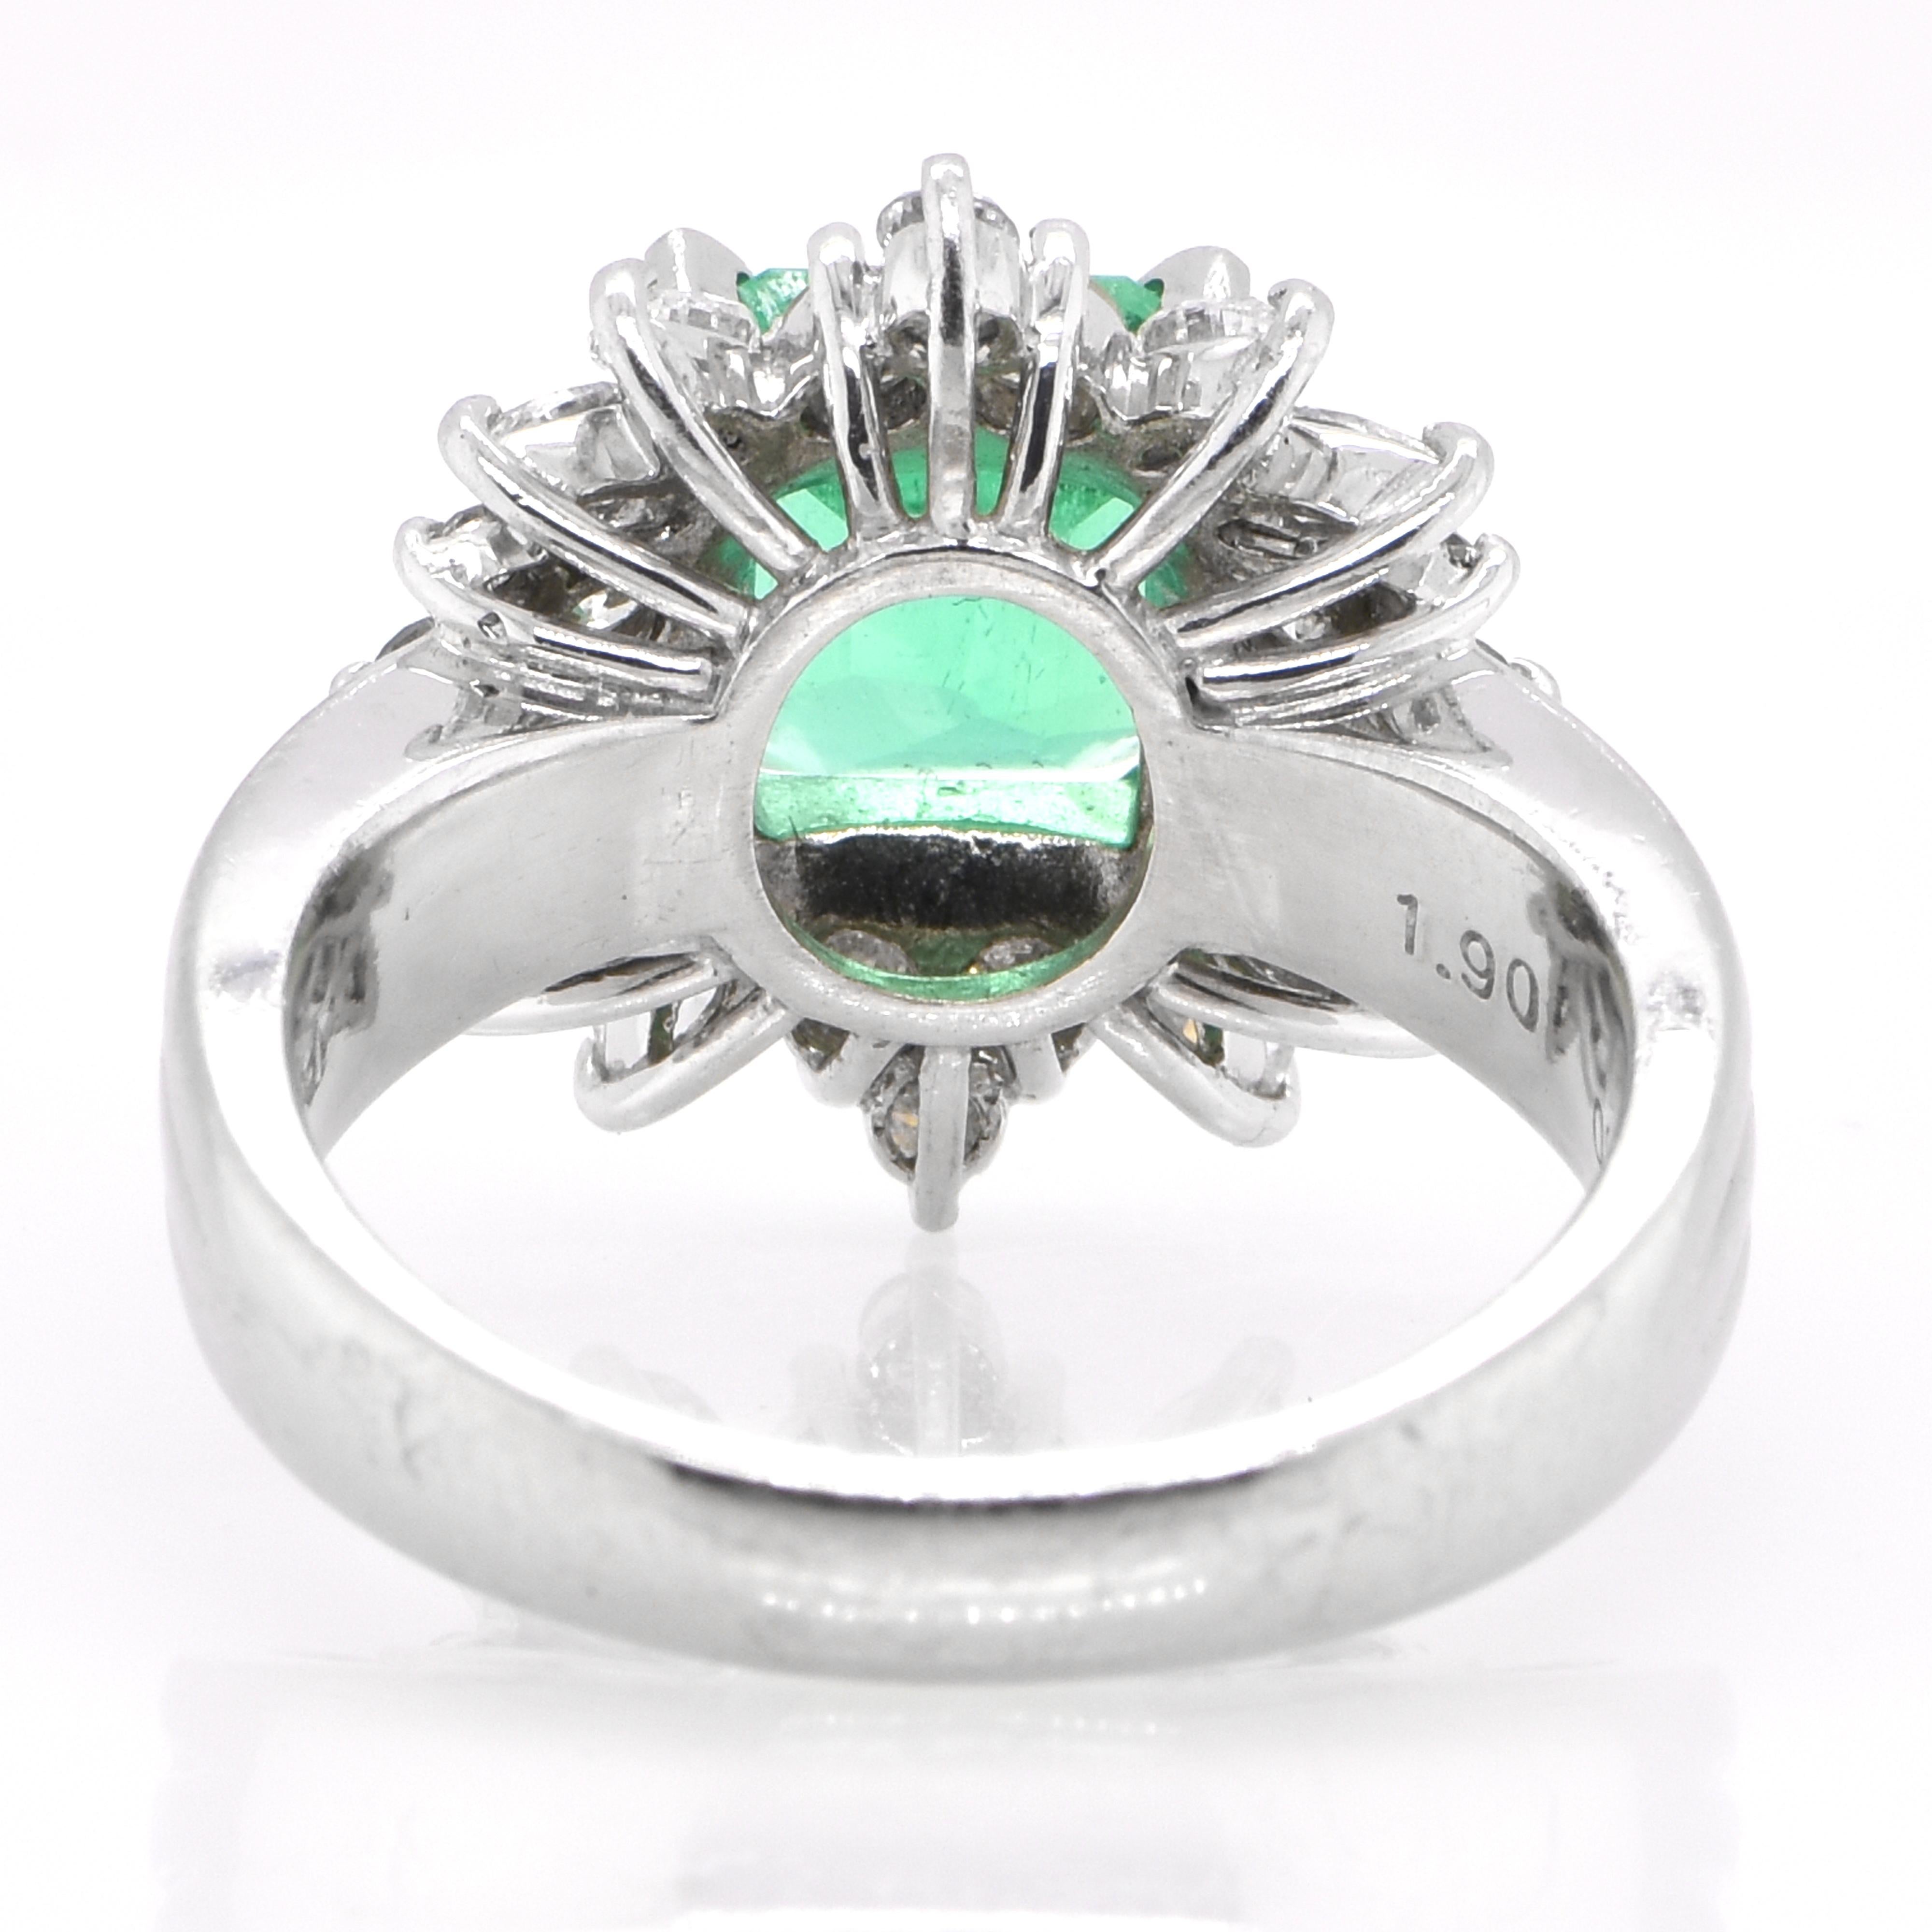 Women's or Men's 1.90 Carat Natural Emerald and Diamond Cocktail Ring Set in Platinum For Sale